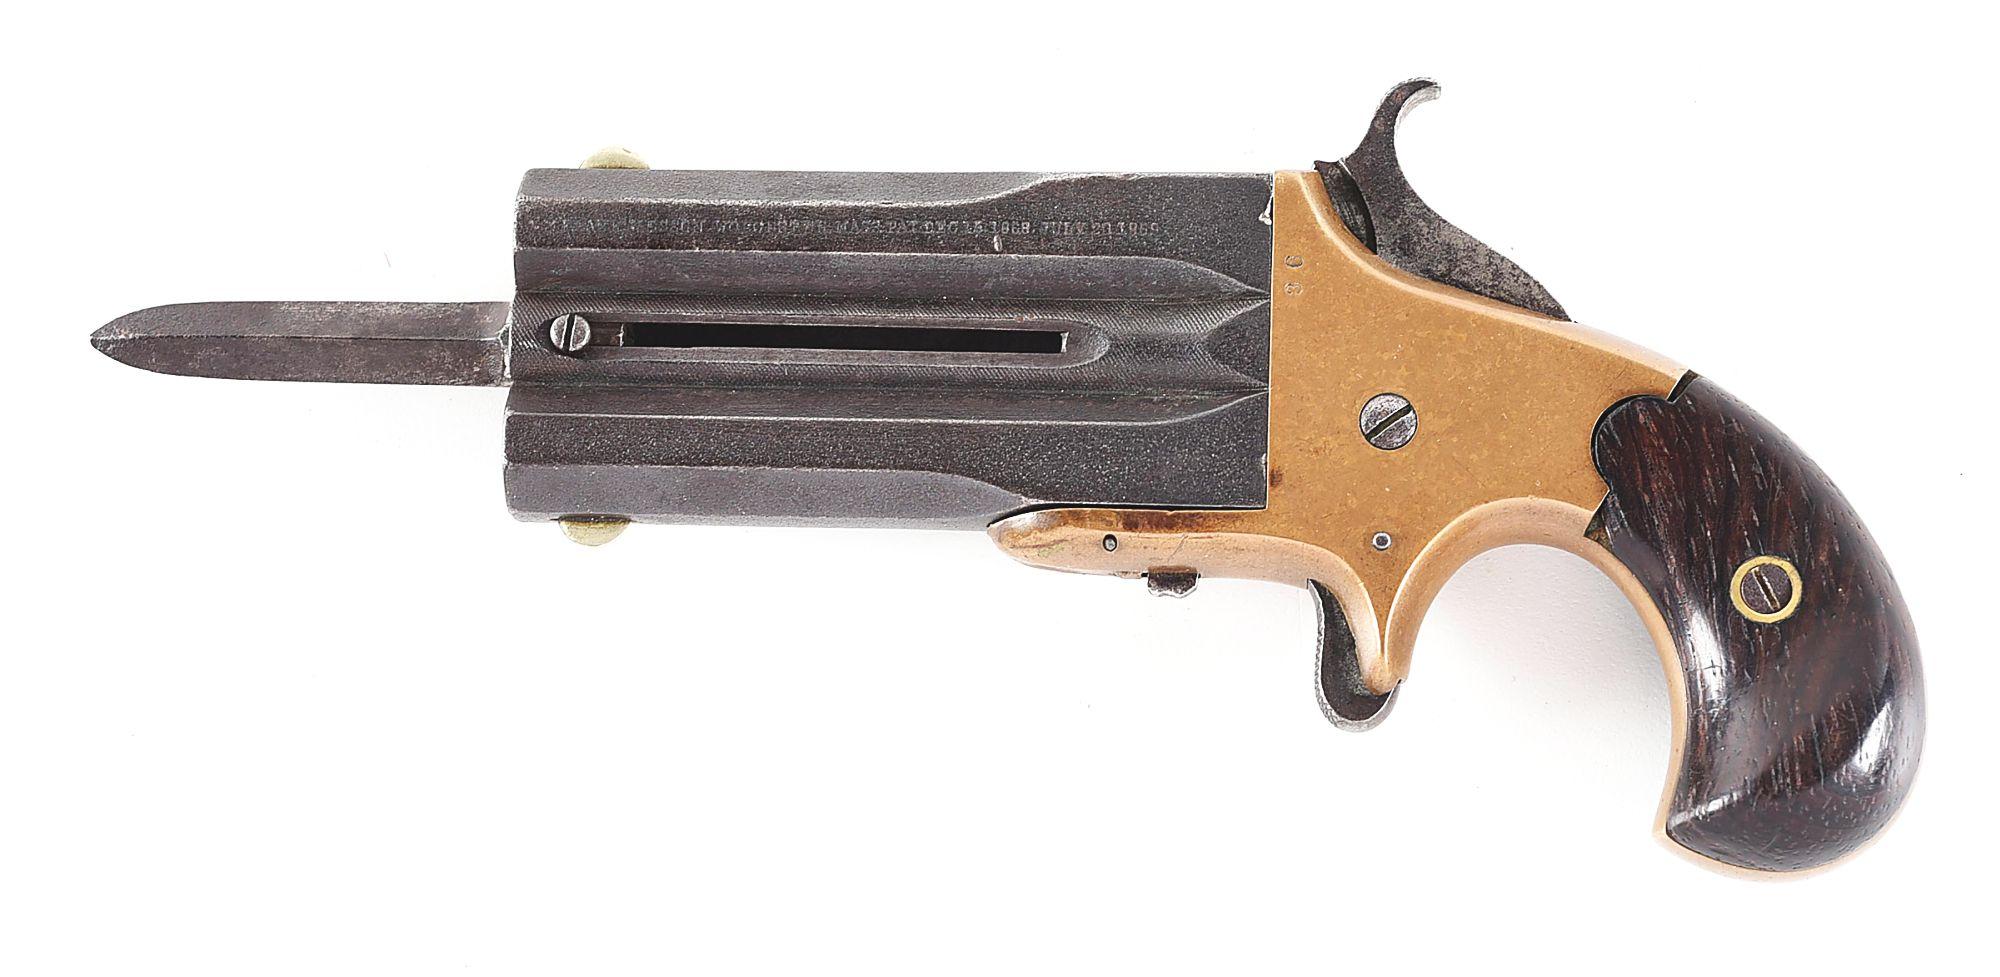 (A) FRANK WESSON LARGE FRAME SUPERPOSED PISTOL WITH SLIDING BAYONET.